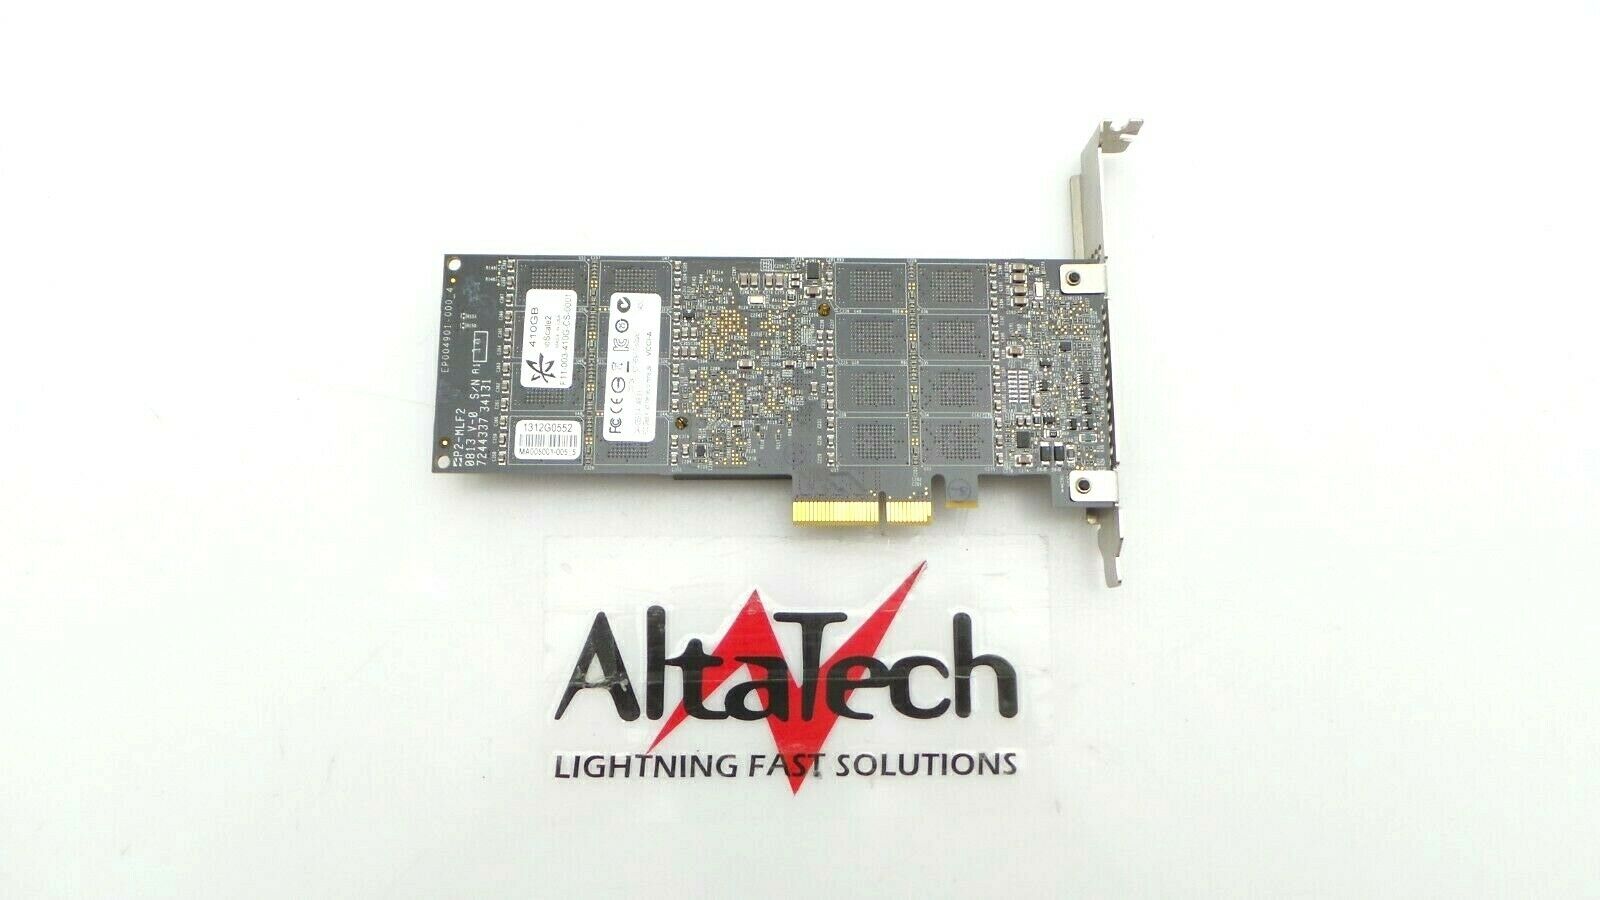 OEM F11-003-410G-CS-0001 SanDisk Fusion ioScale 410GB PCI-E Solid State Drive Card, Used